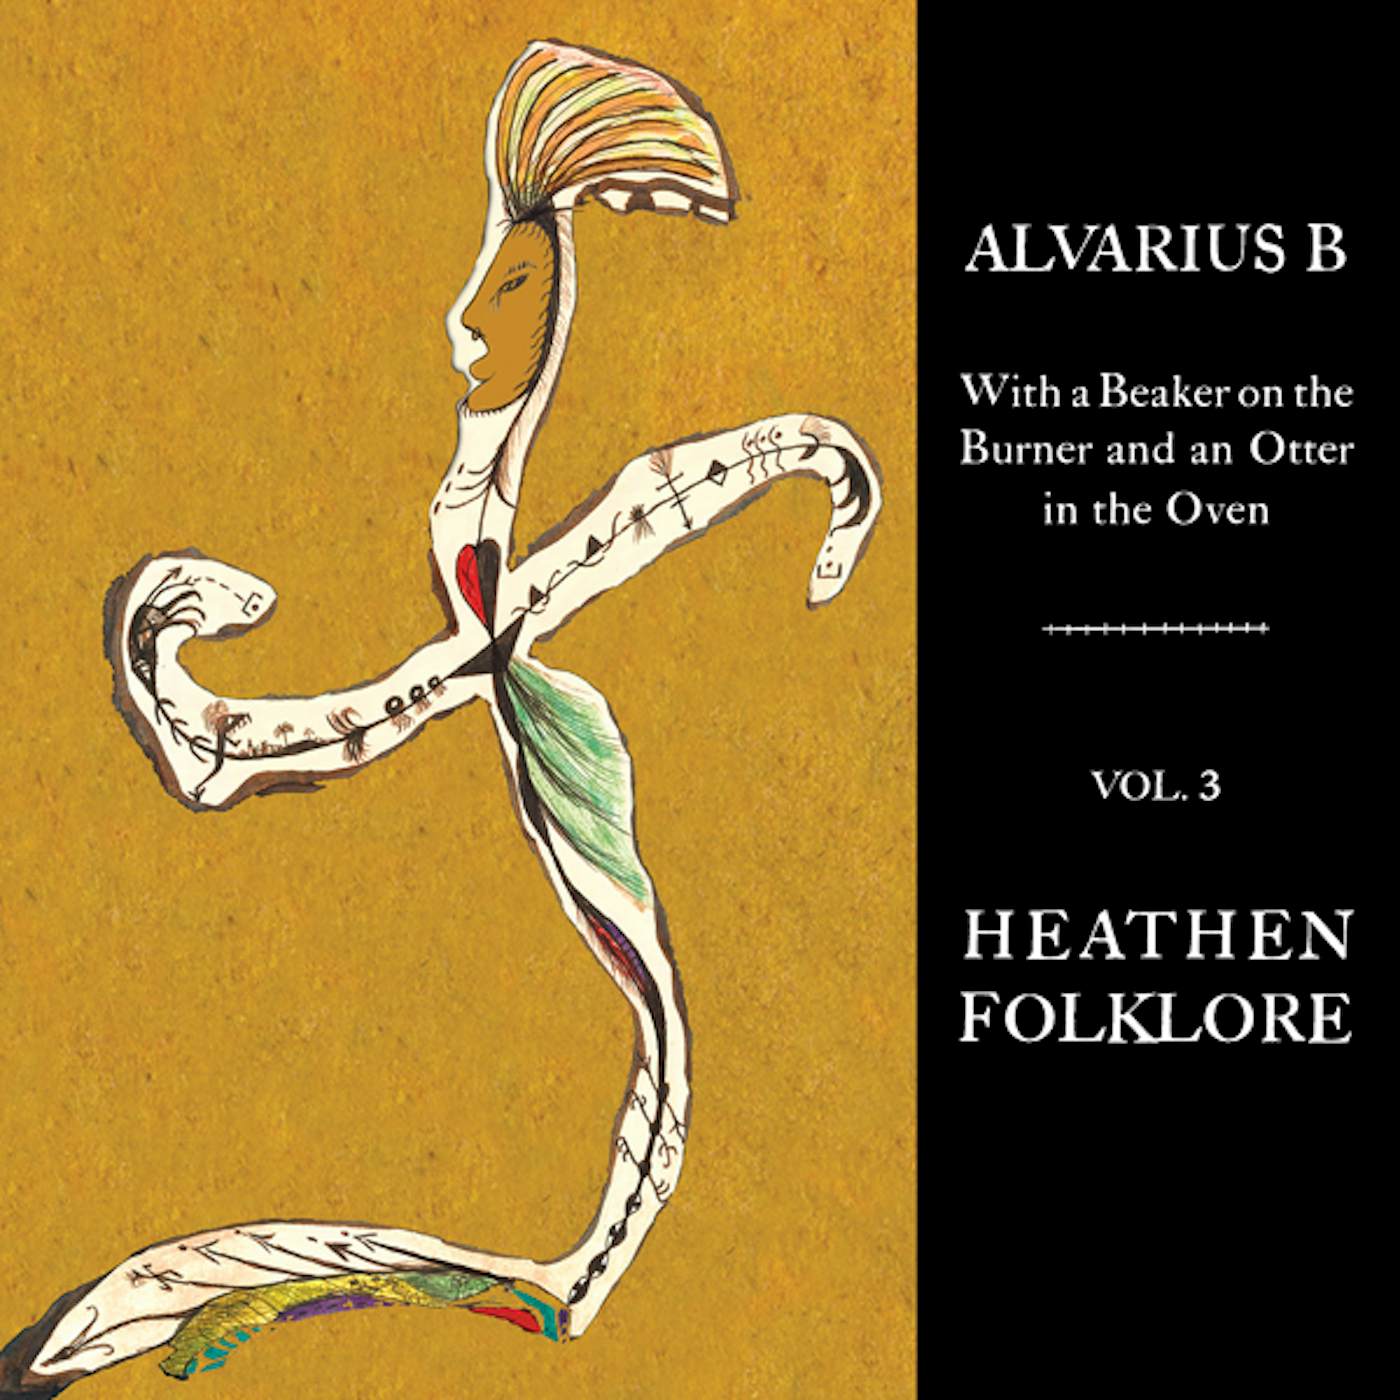 Alvarius B. WITH A BEAKER ON THE BURNER AND AN OTTER IN THE OVEN - VOL. 3 HEATHEN FOLKLORE Vinyl Record